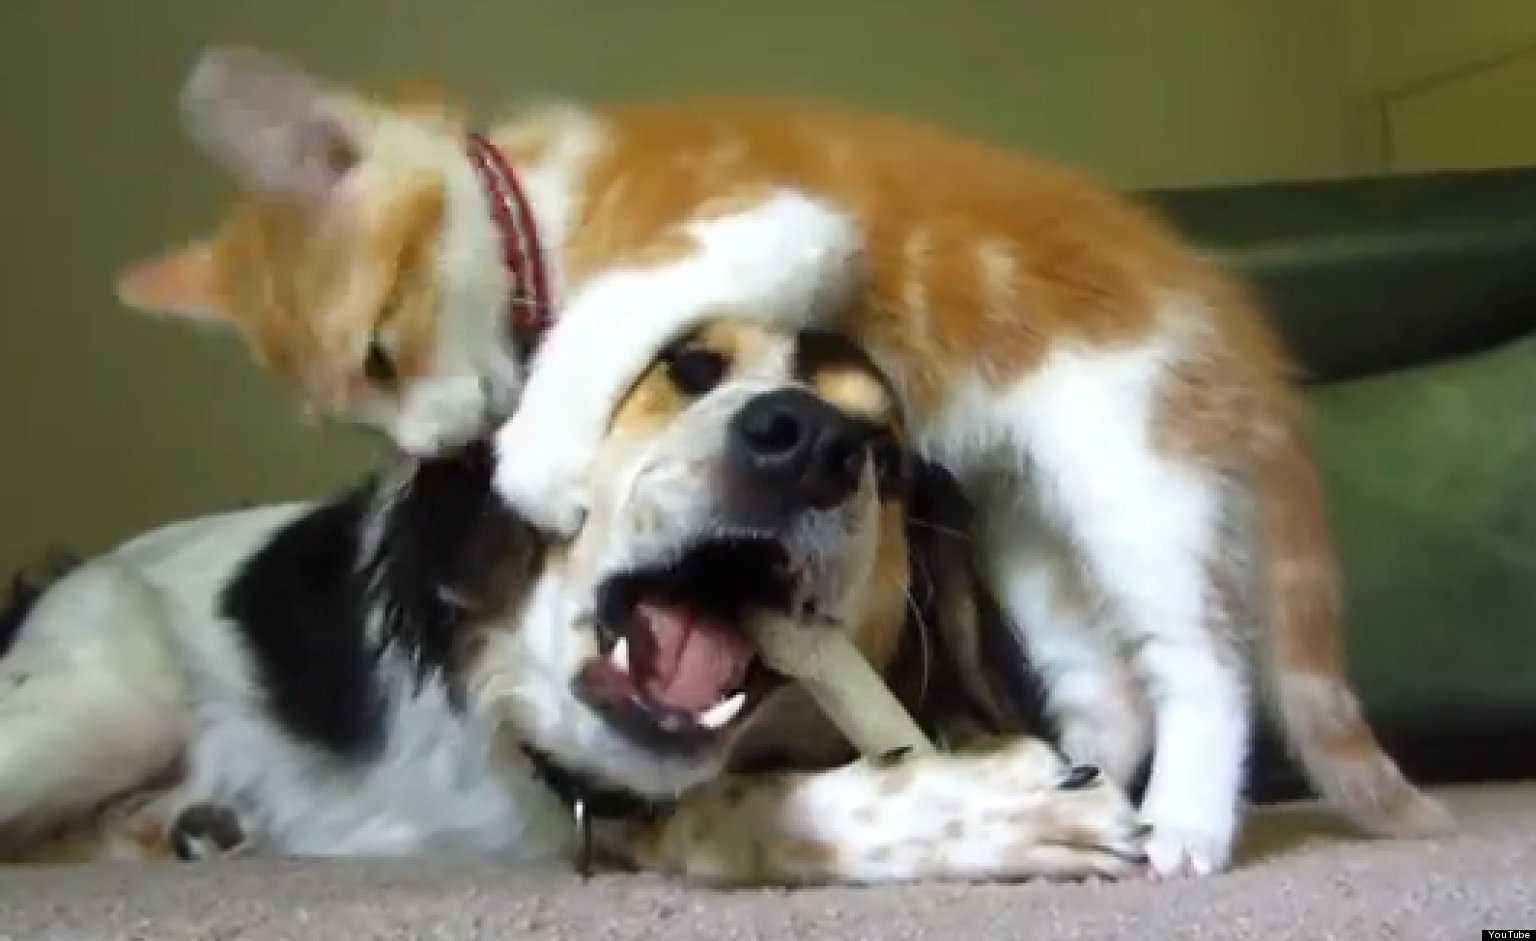 Cat Annoys Dog Trying To Eat A Bone, Cuteness Ensues (VIDEO) HuffPost